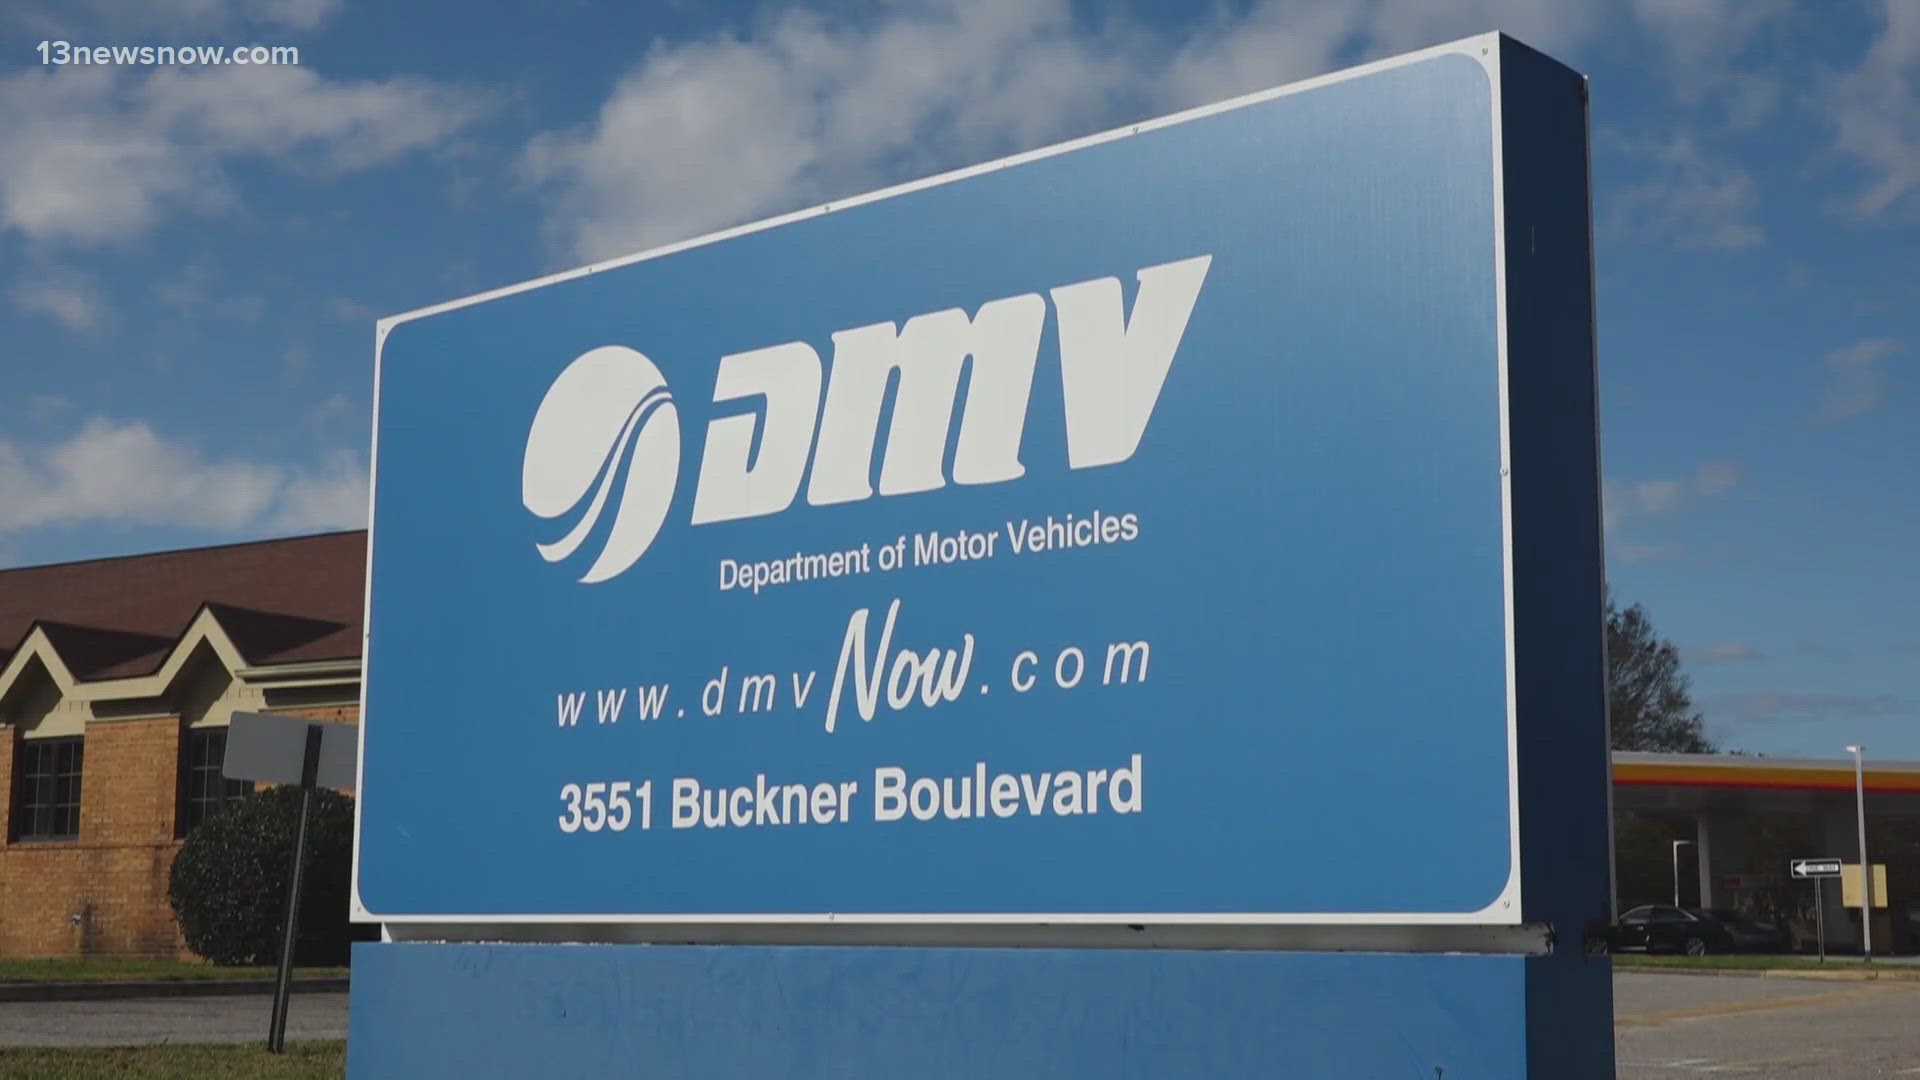 DMV staff at the Hilltop location announced a statewide computer issue was affecting all DMV locations in Virginia.